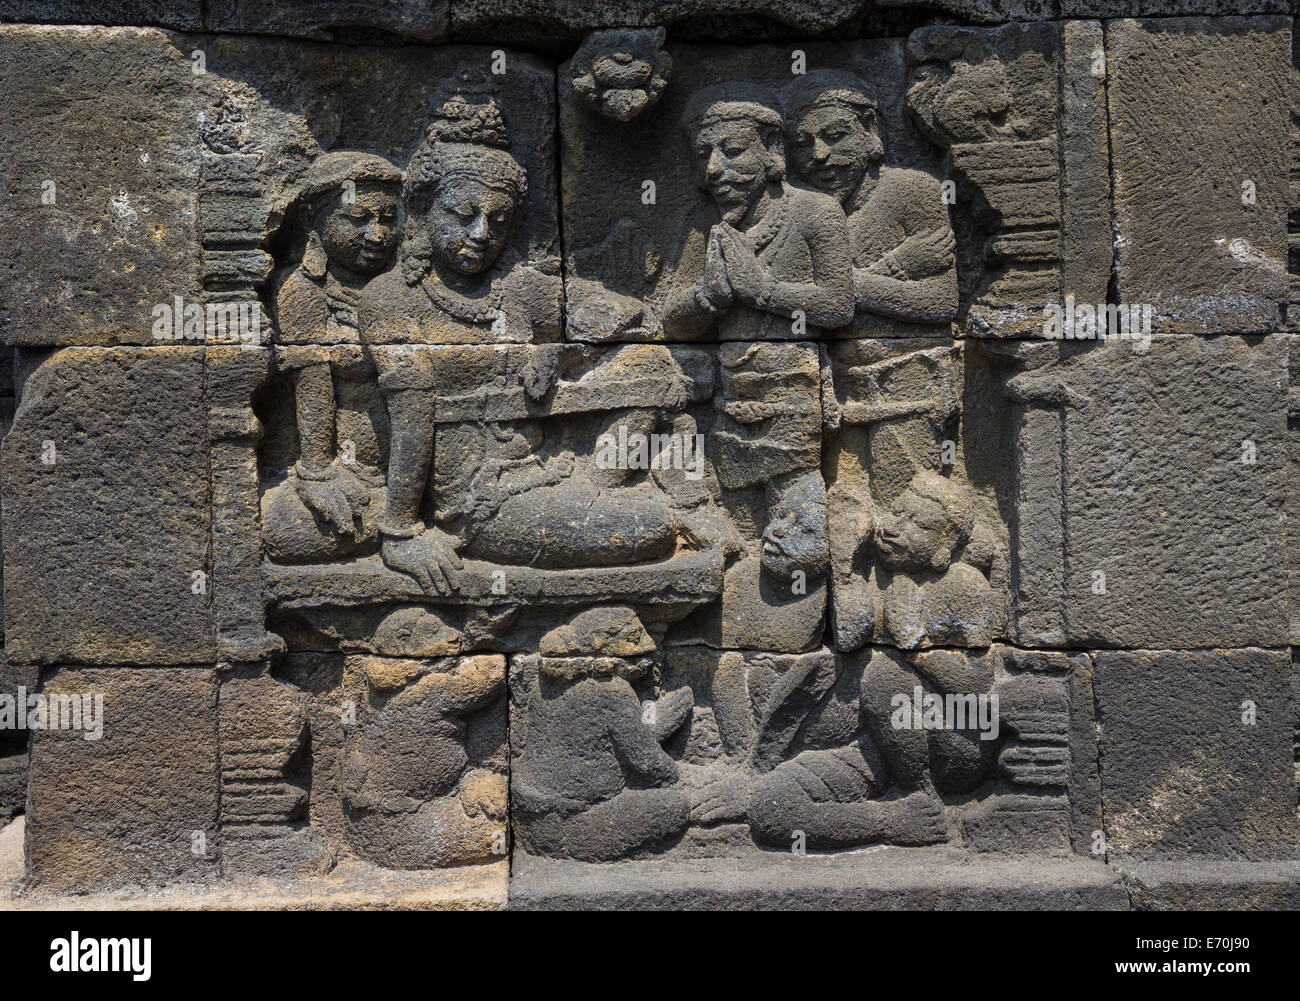 Borobudur, Java, Indonesia.  Bas-relief Stone Carving Relief Depicting King, Queen, and Teachers. Stock Photo